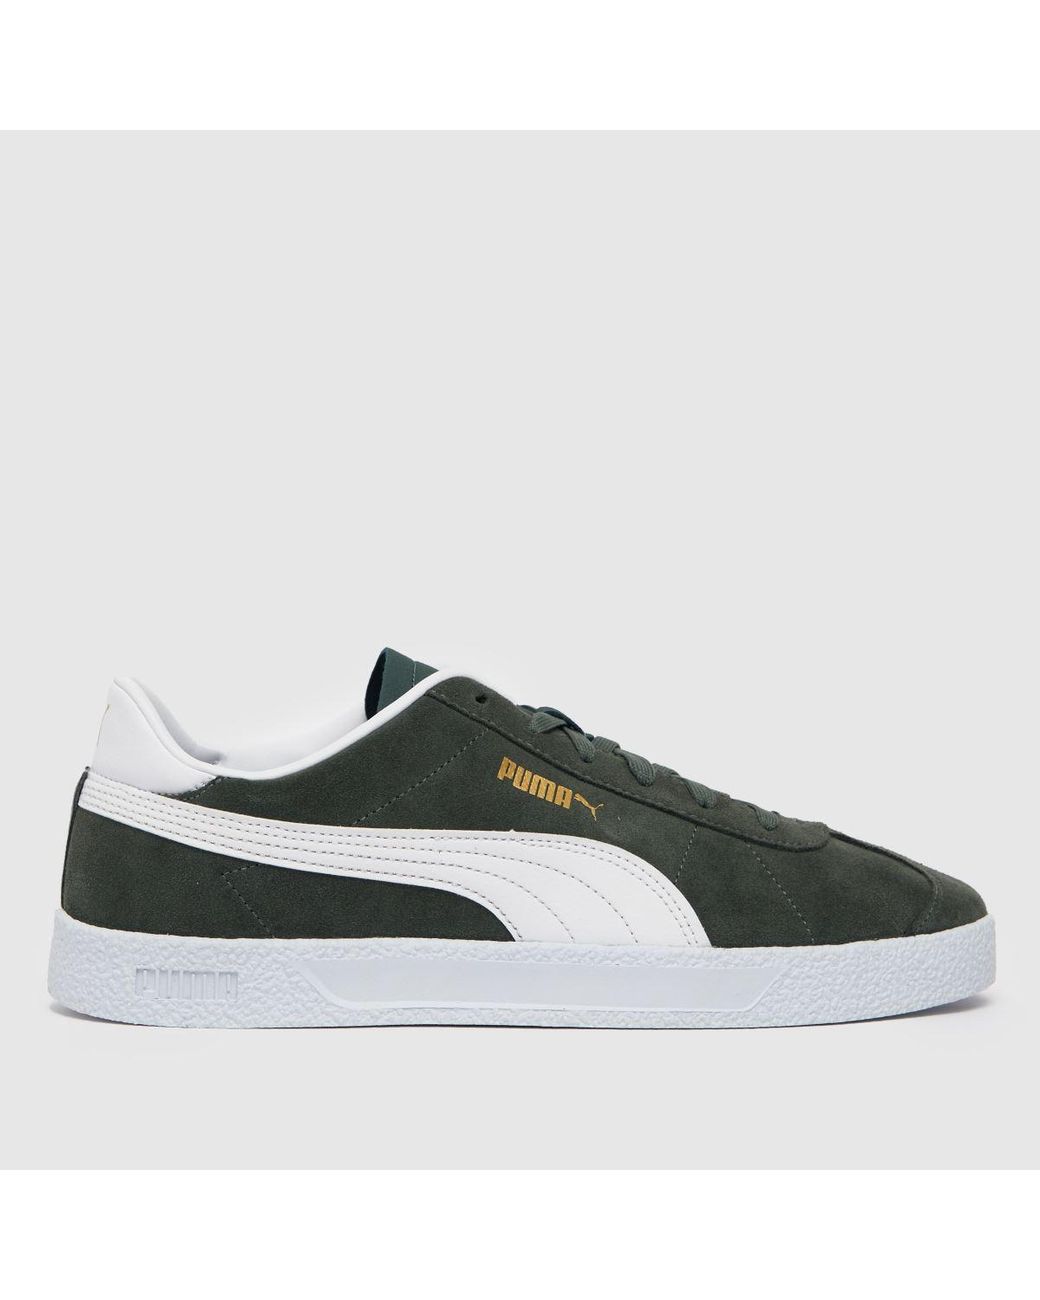 PUMA Suede Club Trainers in Khaki (Green) for Men | Lyst UK